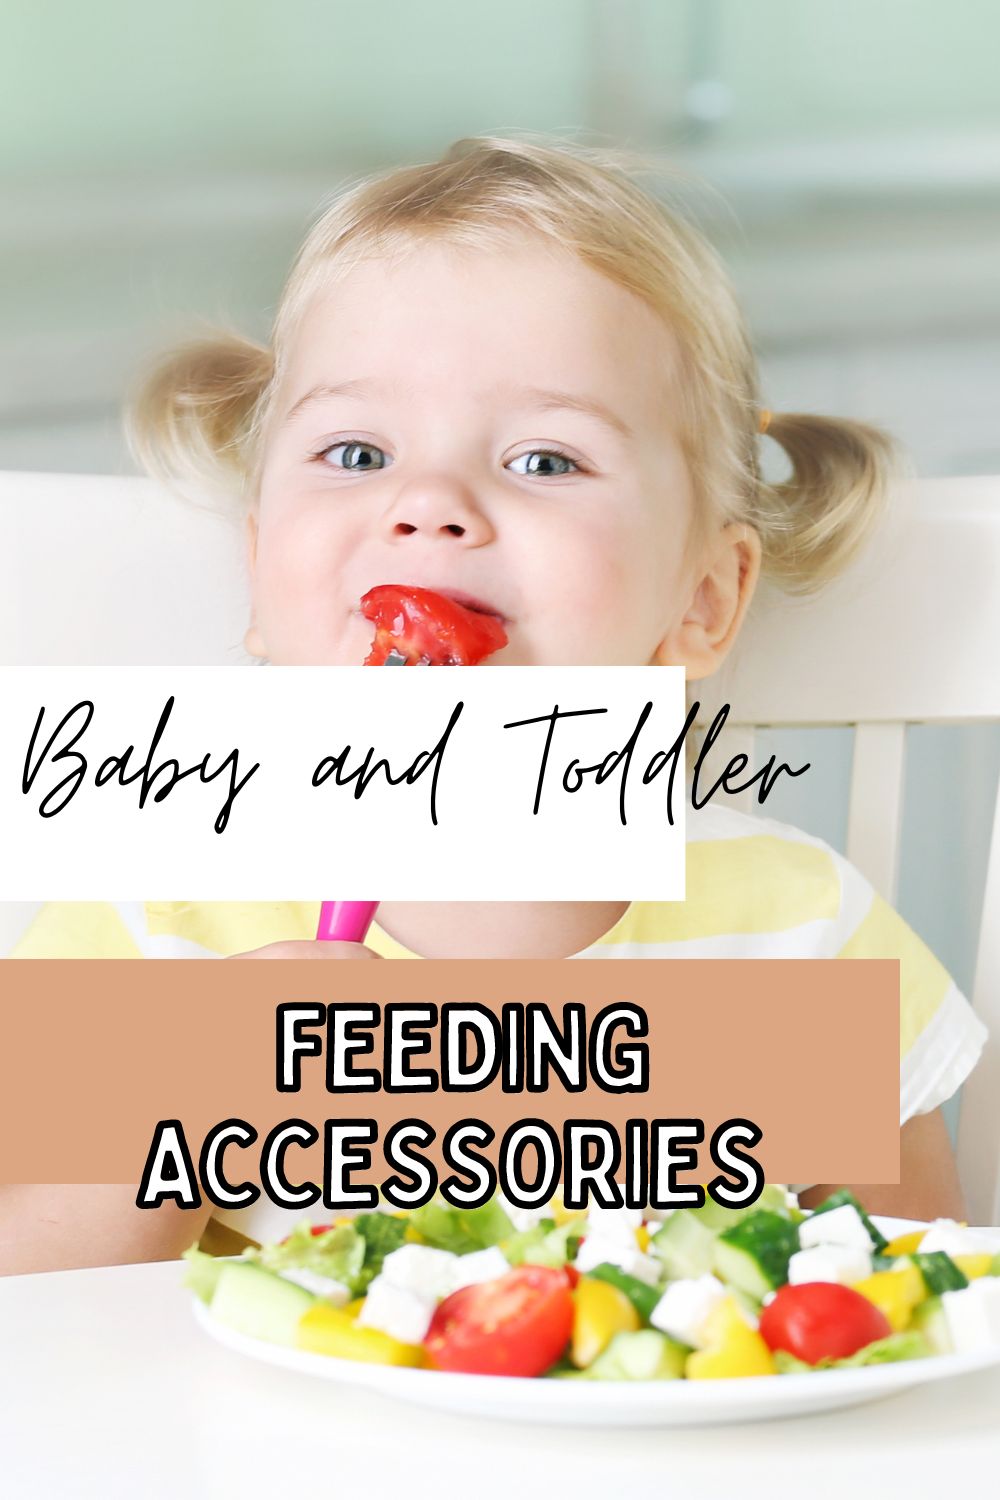 10 baby and toddler feeding supplies available on Amazon: